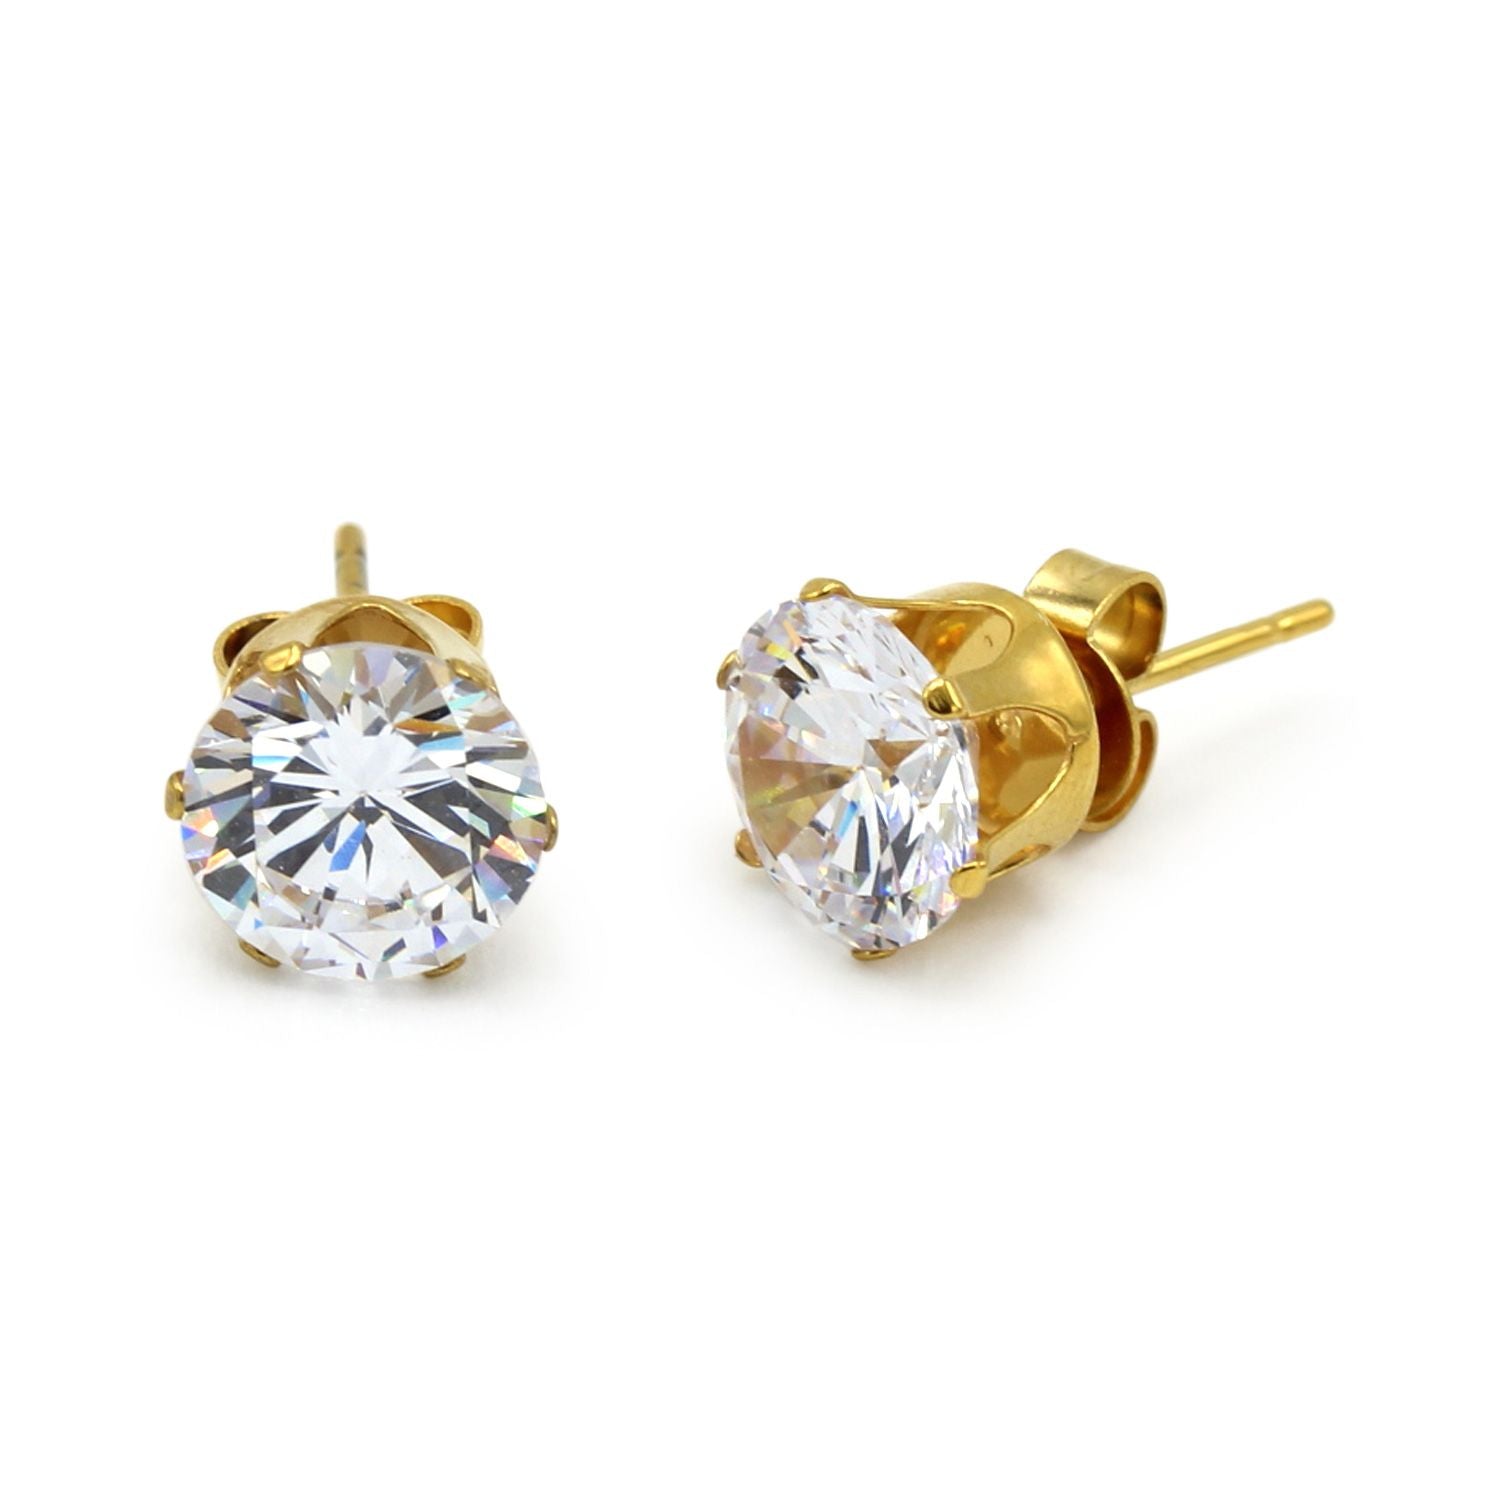 Large Round Elegant 18ct Gold Plated Stud Earrings – The Colourful